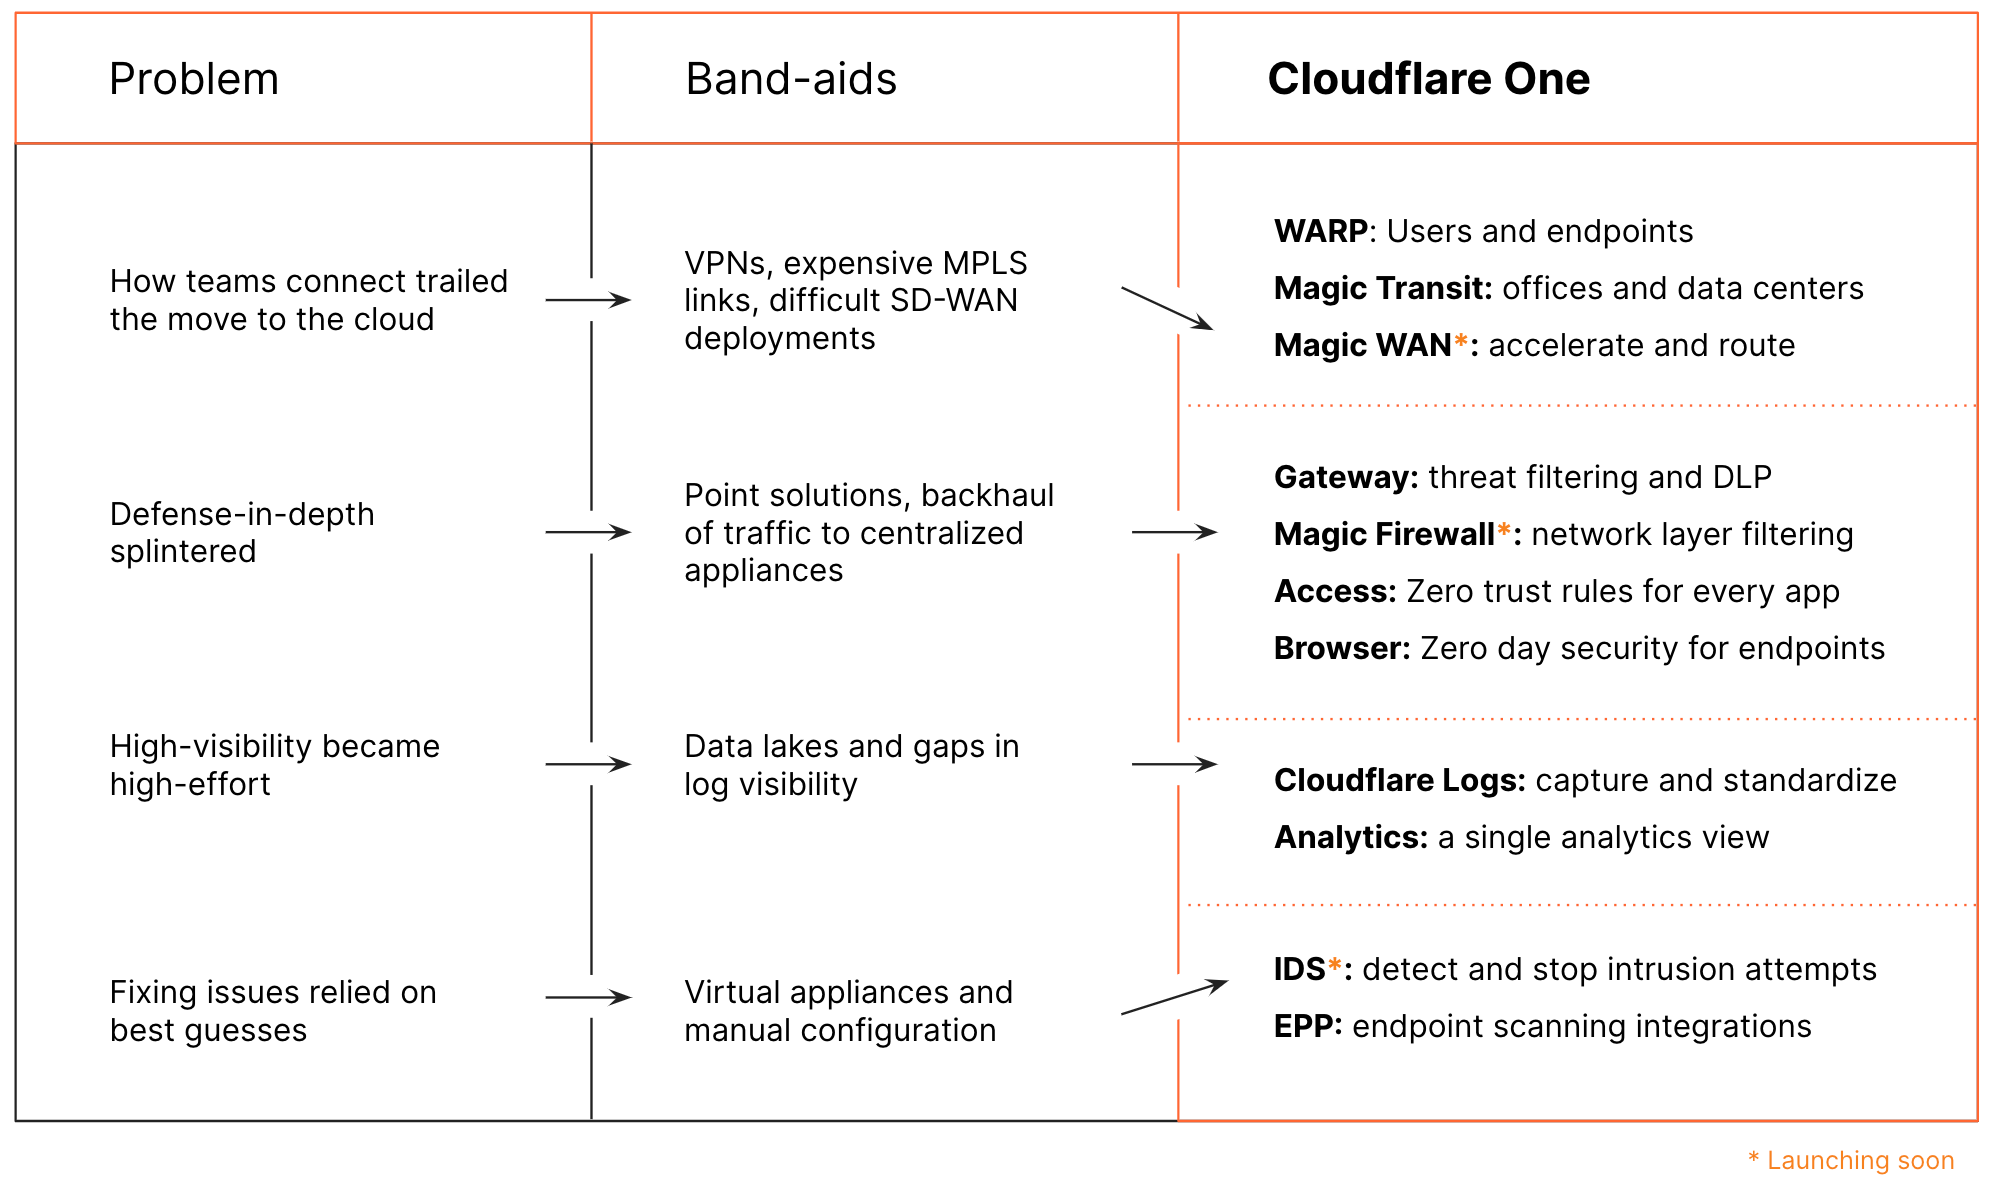 What is Cloudflare One?